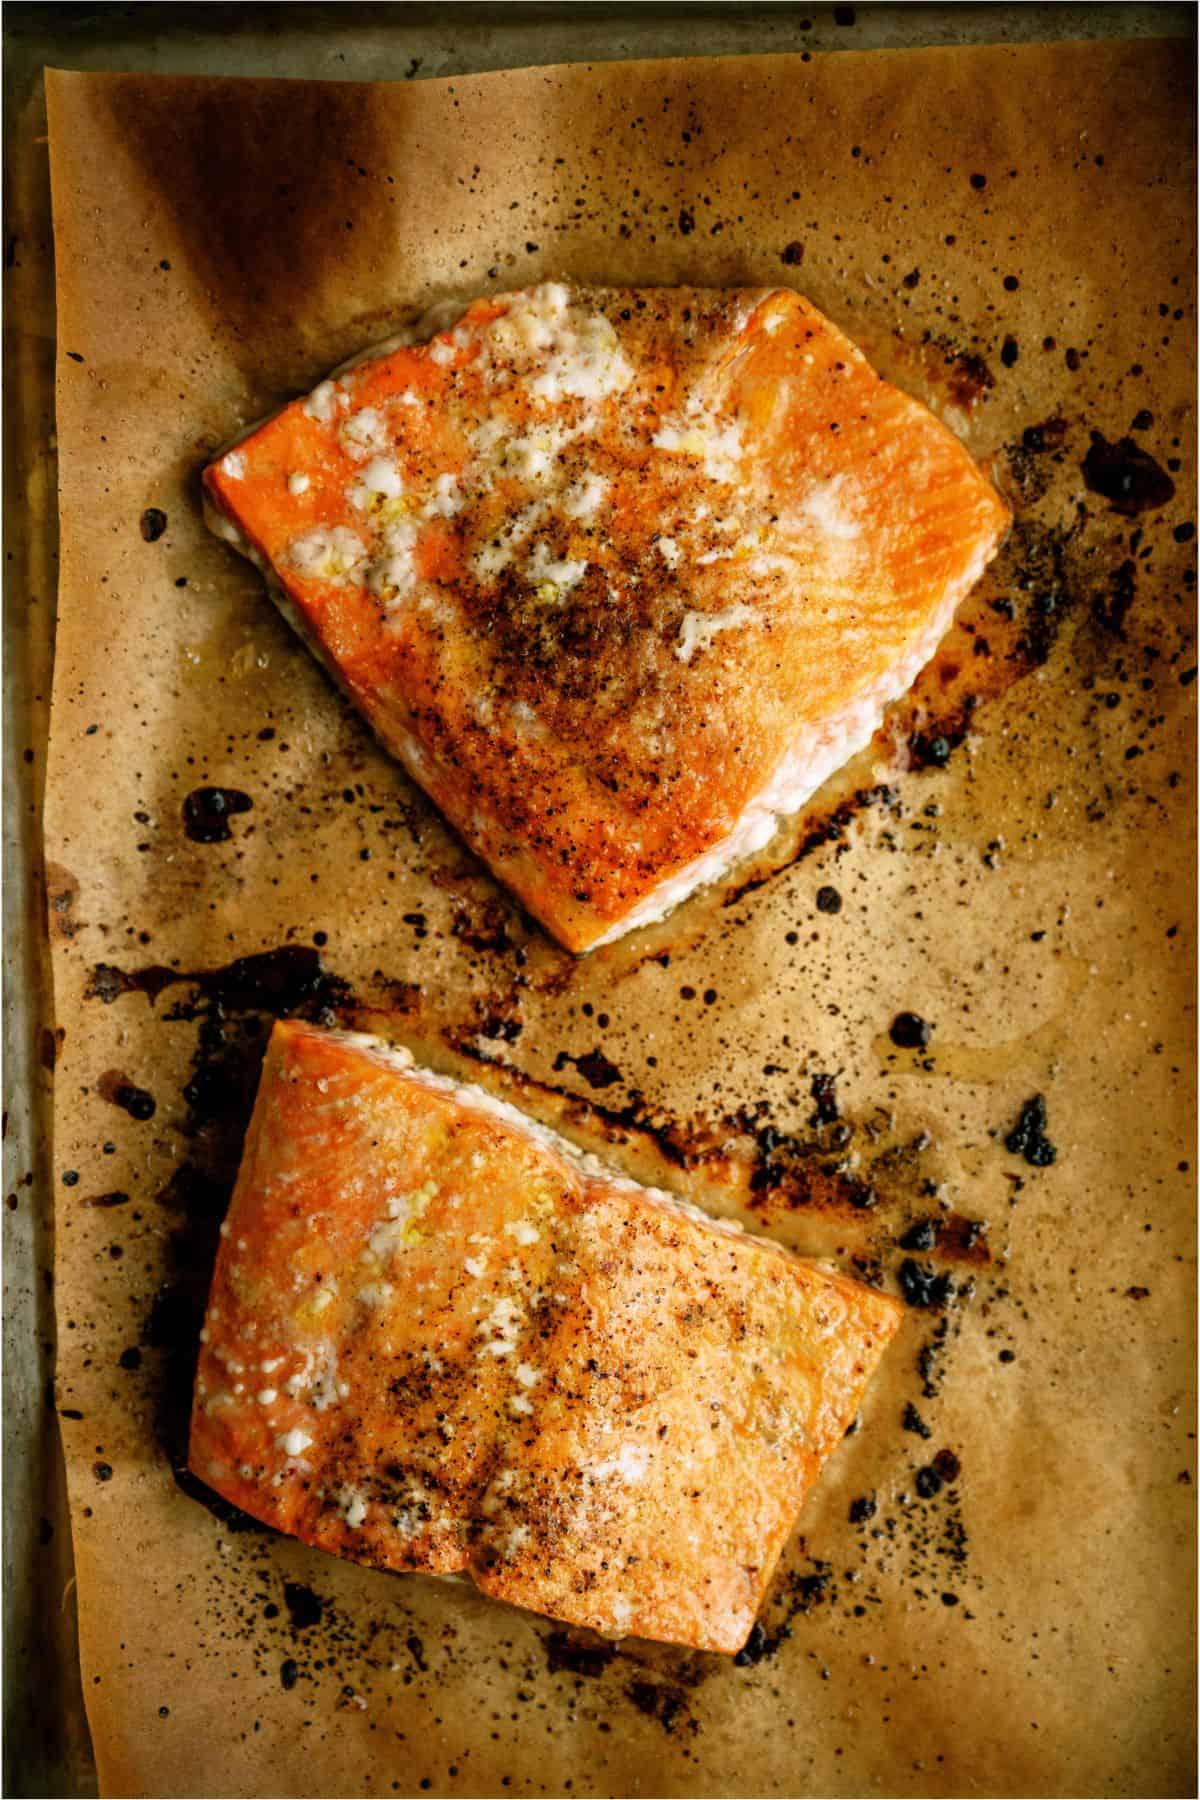 Two salmon filets on a baking sheet, baked and seasoned